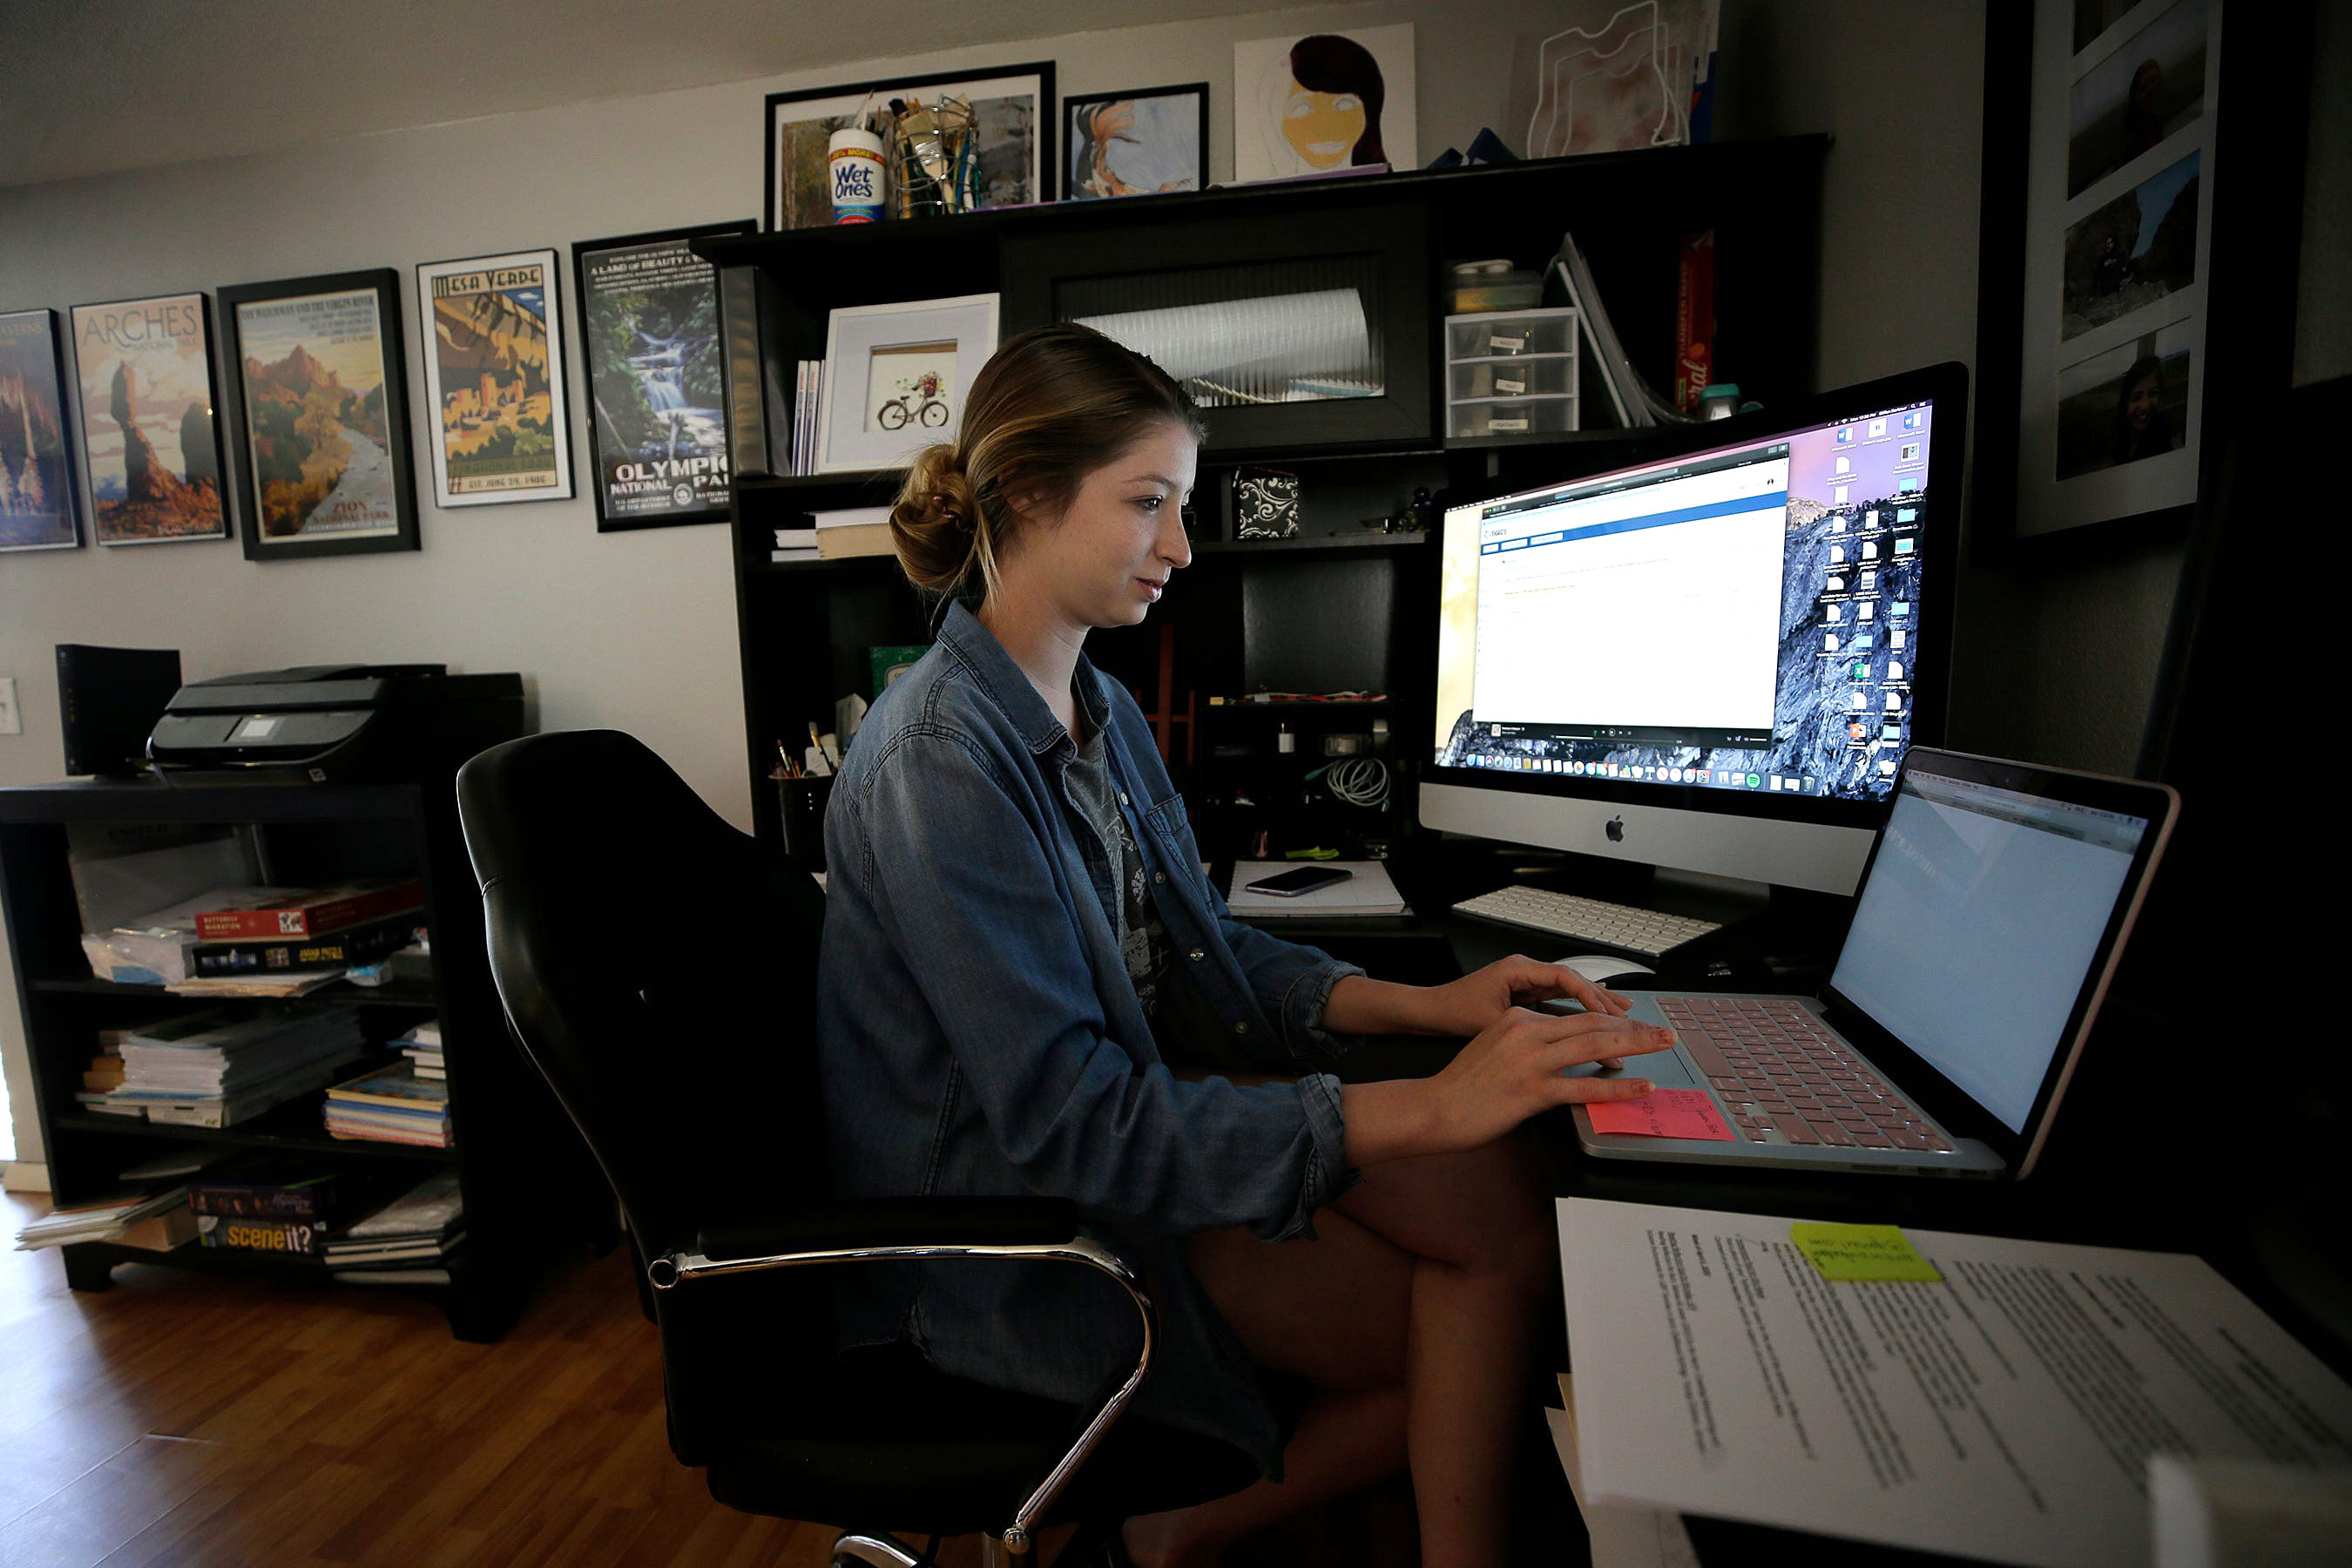 Gillian Barbour, a senior education student at Texas State University, works on her distance learning classes at home in El Paso, Texas, on March 30.